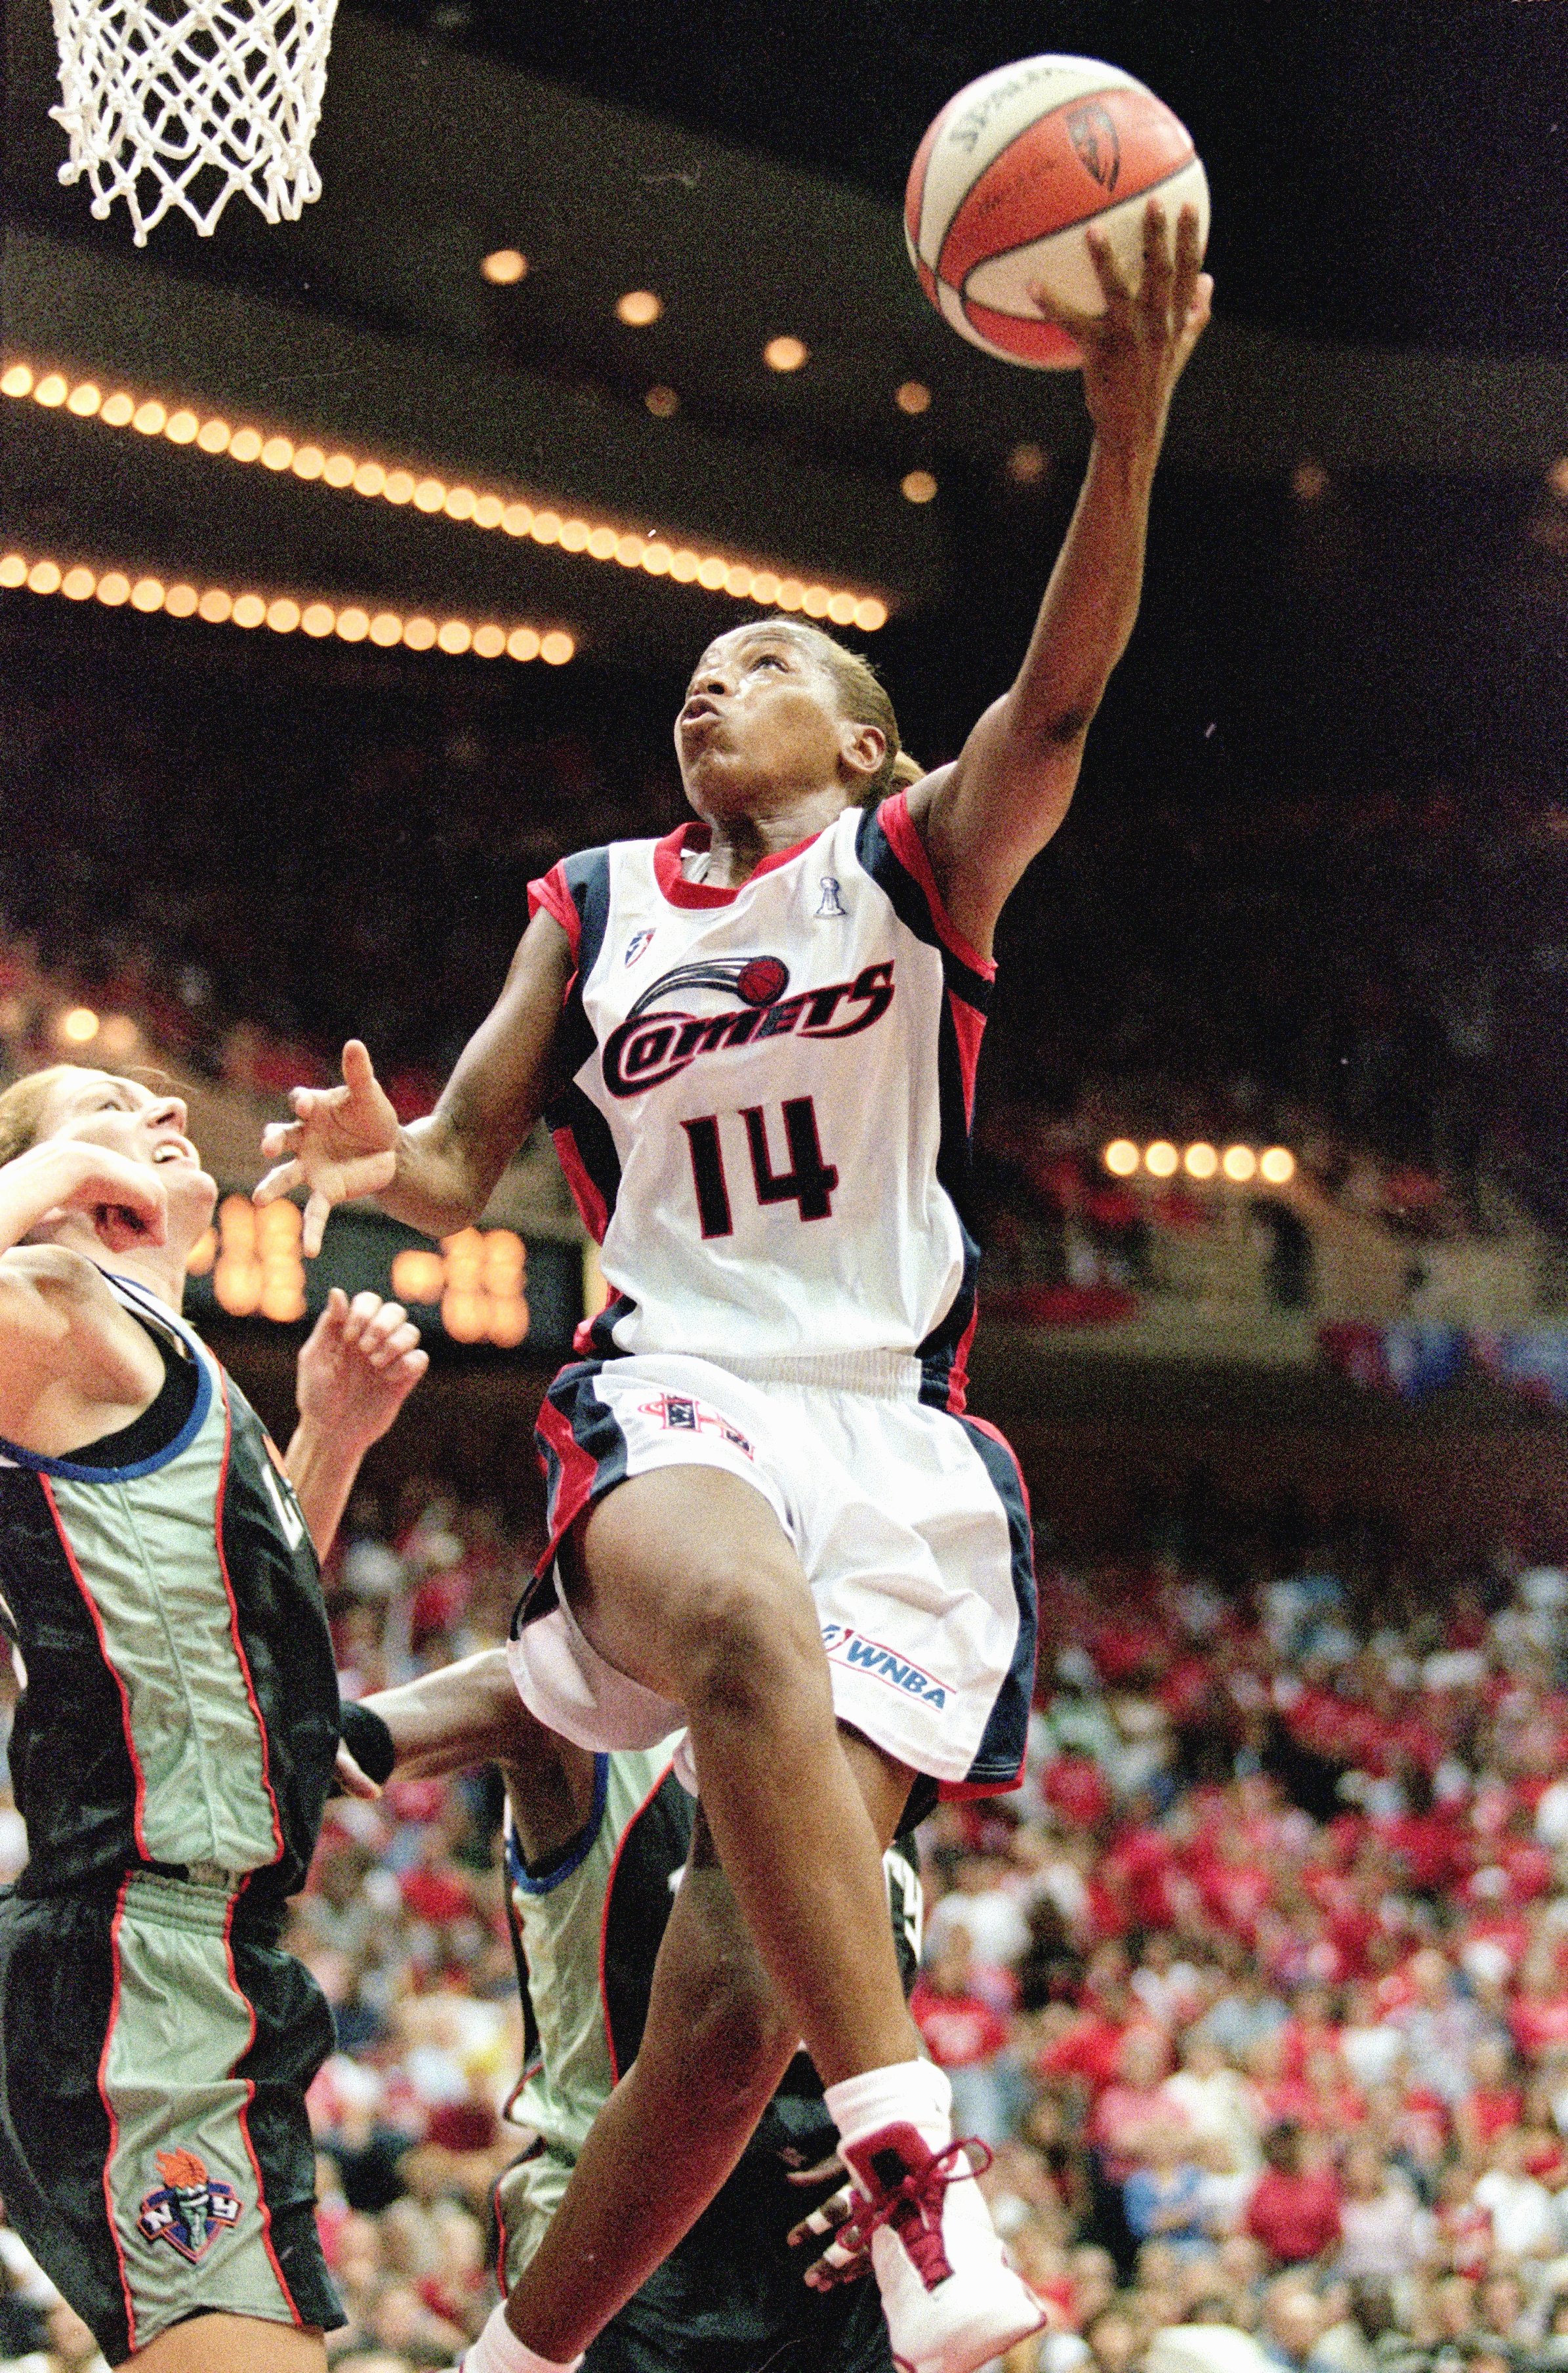 26 Aug 2000:  Cynthia Cooper #14 of the Houston Comets makes a layup during the game against the New York Liberty at the Compaq Center in Houston, Texas. The Comets defeated the Liberty 79-73.   NOTE TO USER: It is expressly understood that the only right